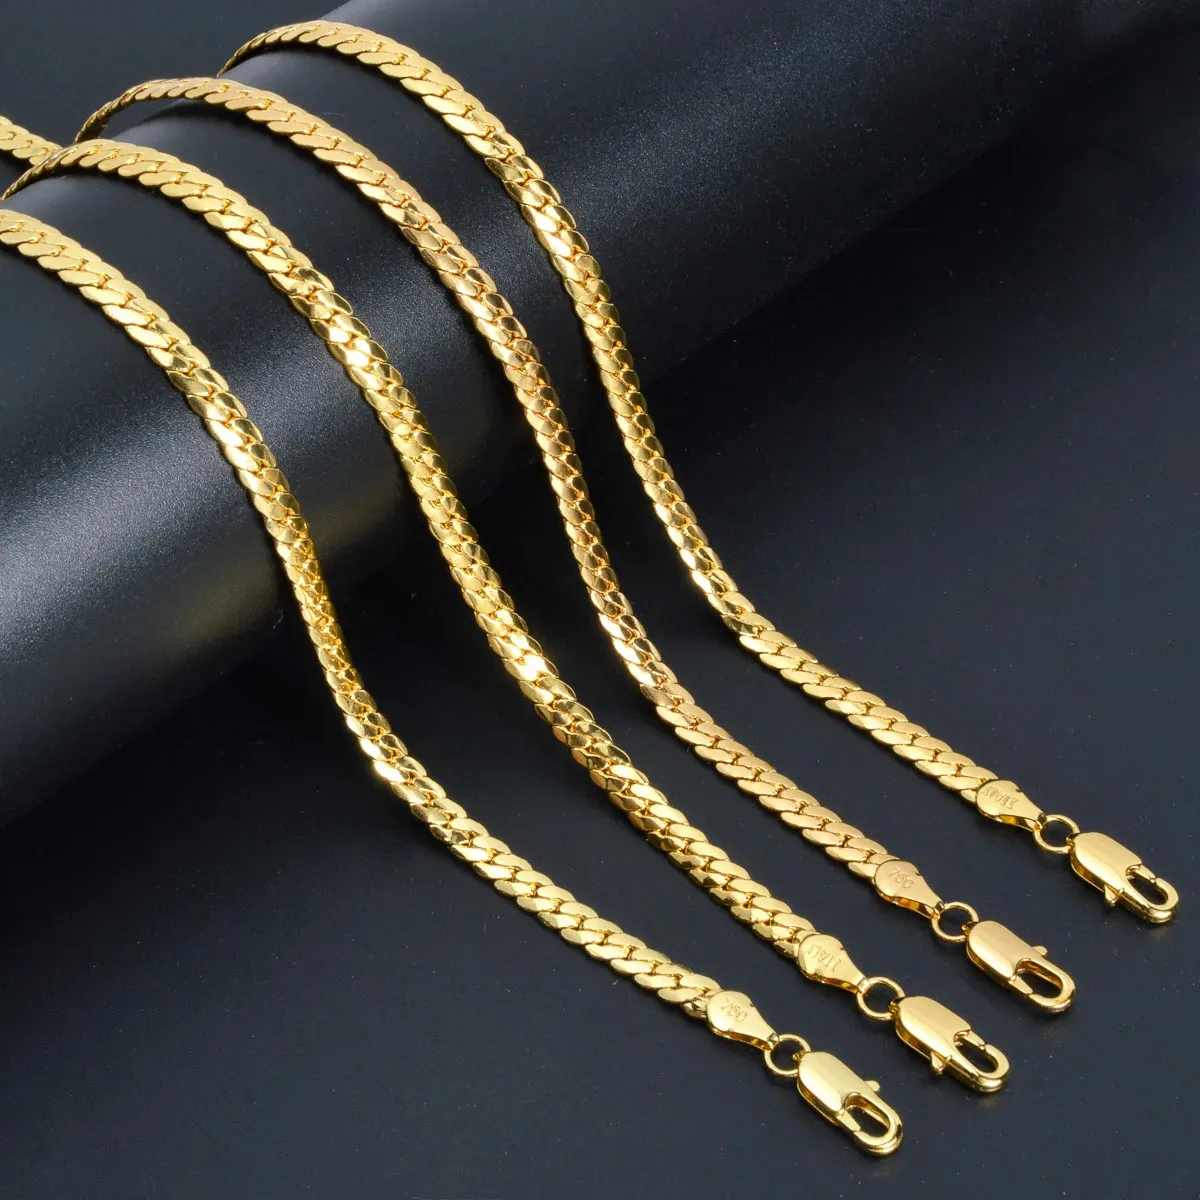 Diana Baby Long Hiphop Link Chain Necklace For Women Men Fashion Italian Neck Jewelry Gold Color Choker Accessories Gift For Him 240104